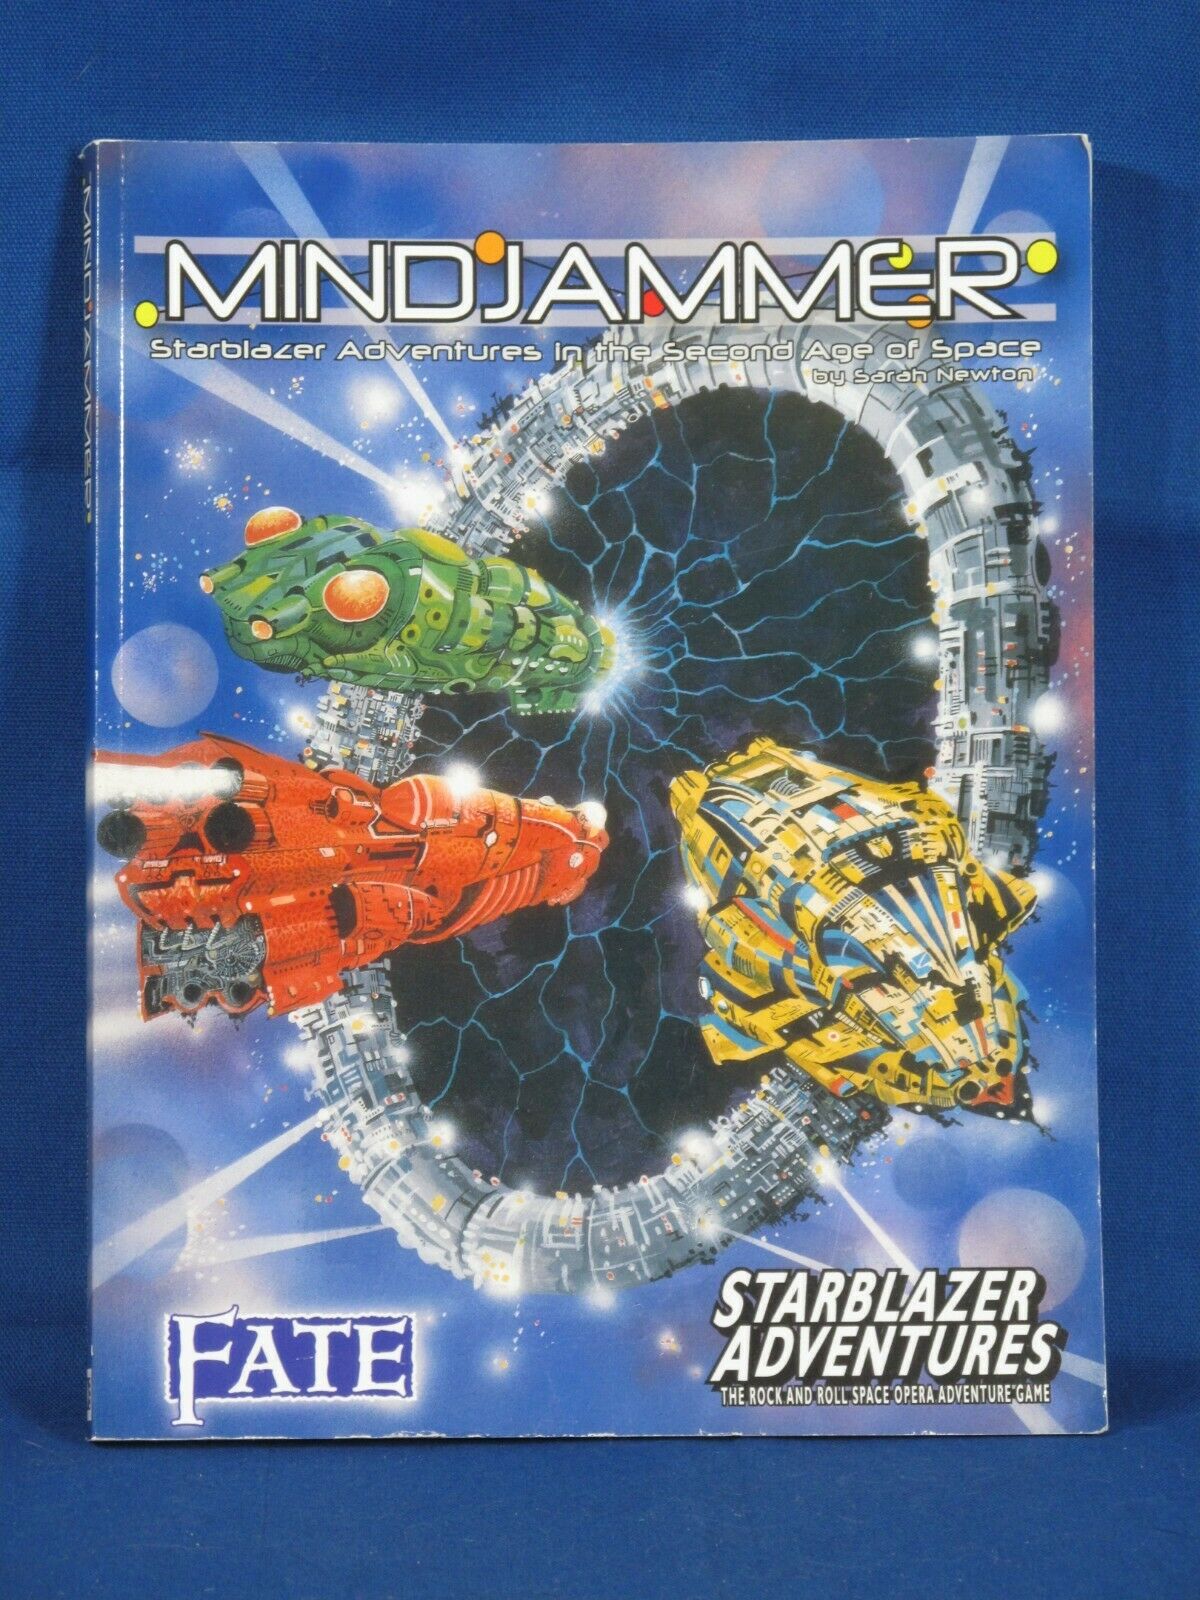 MINDJAMMER STARBLAZER Adventures In Second Age of Space Newton 2009 Role Playing